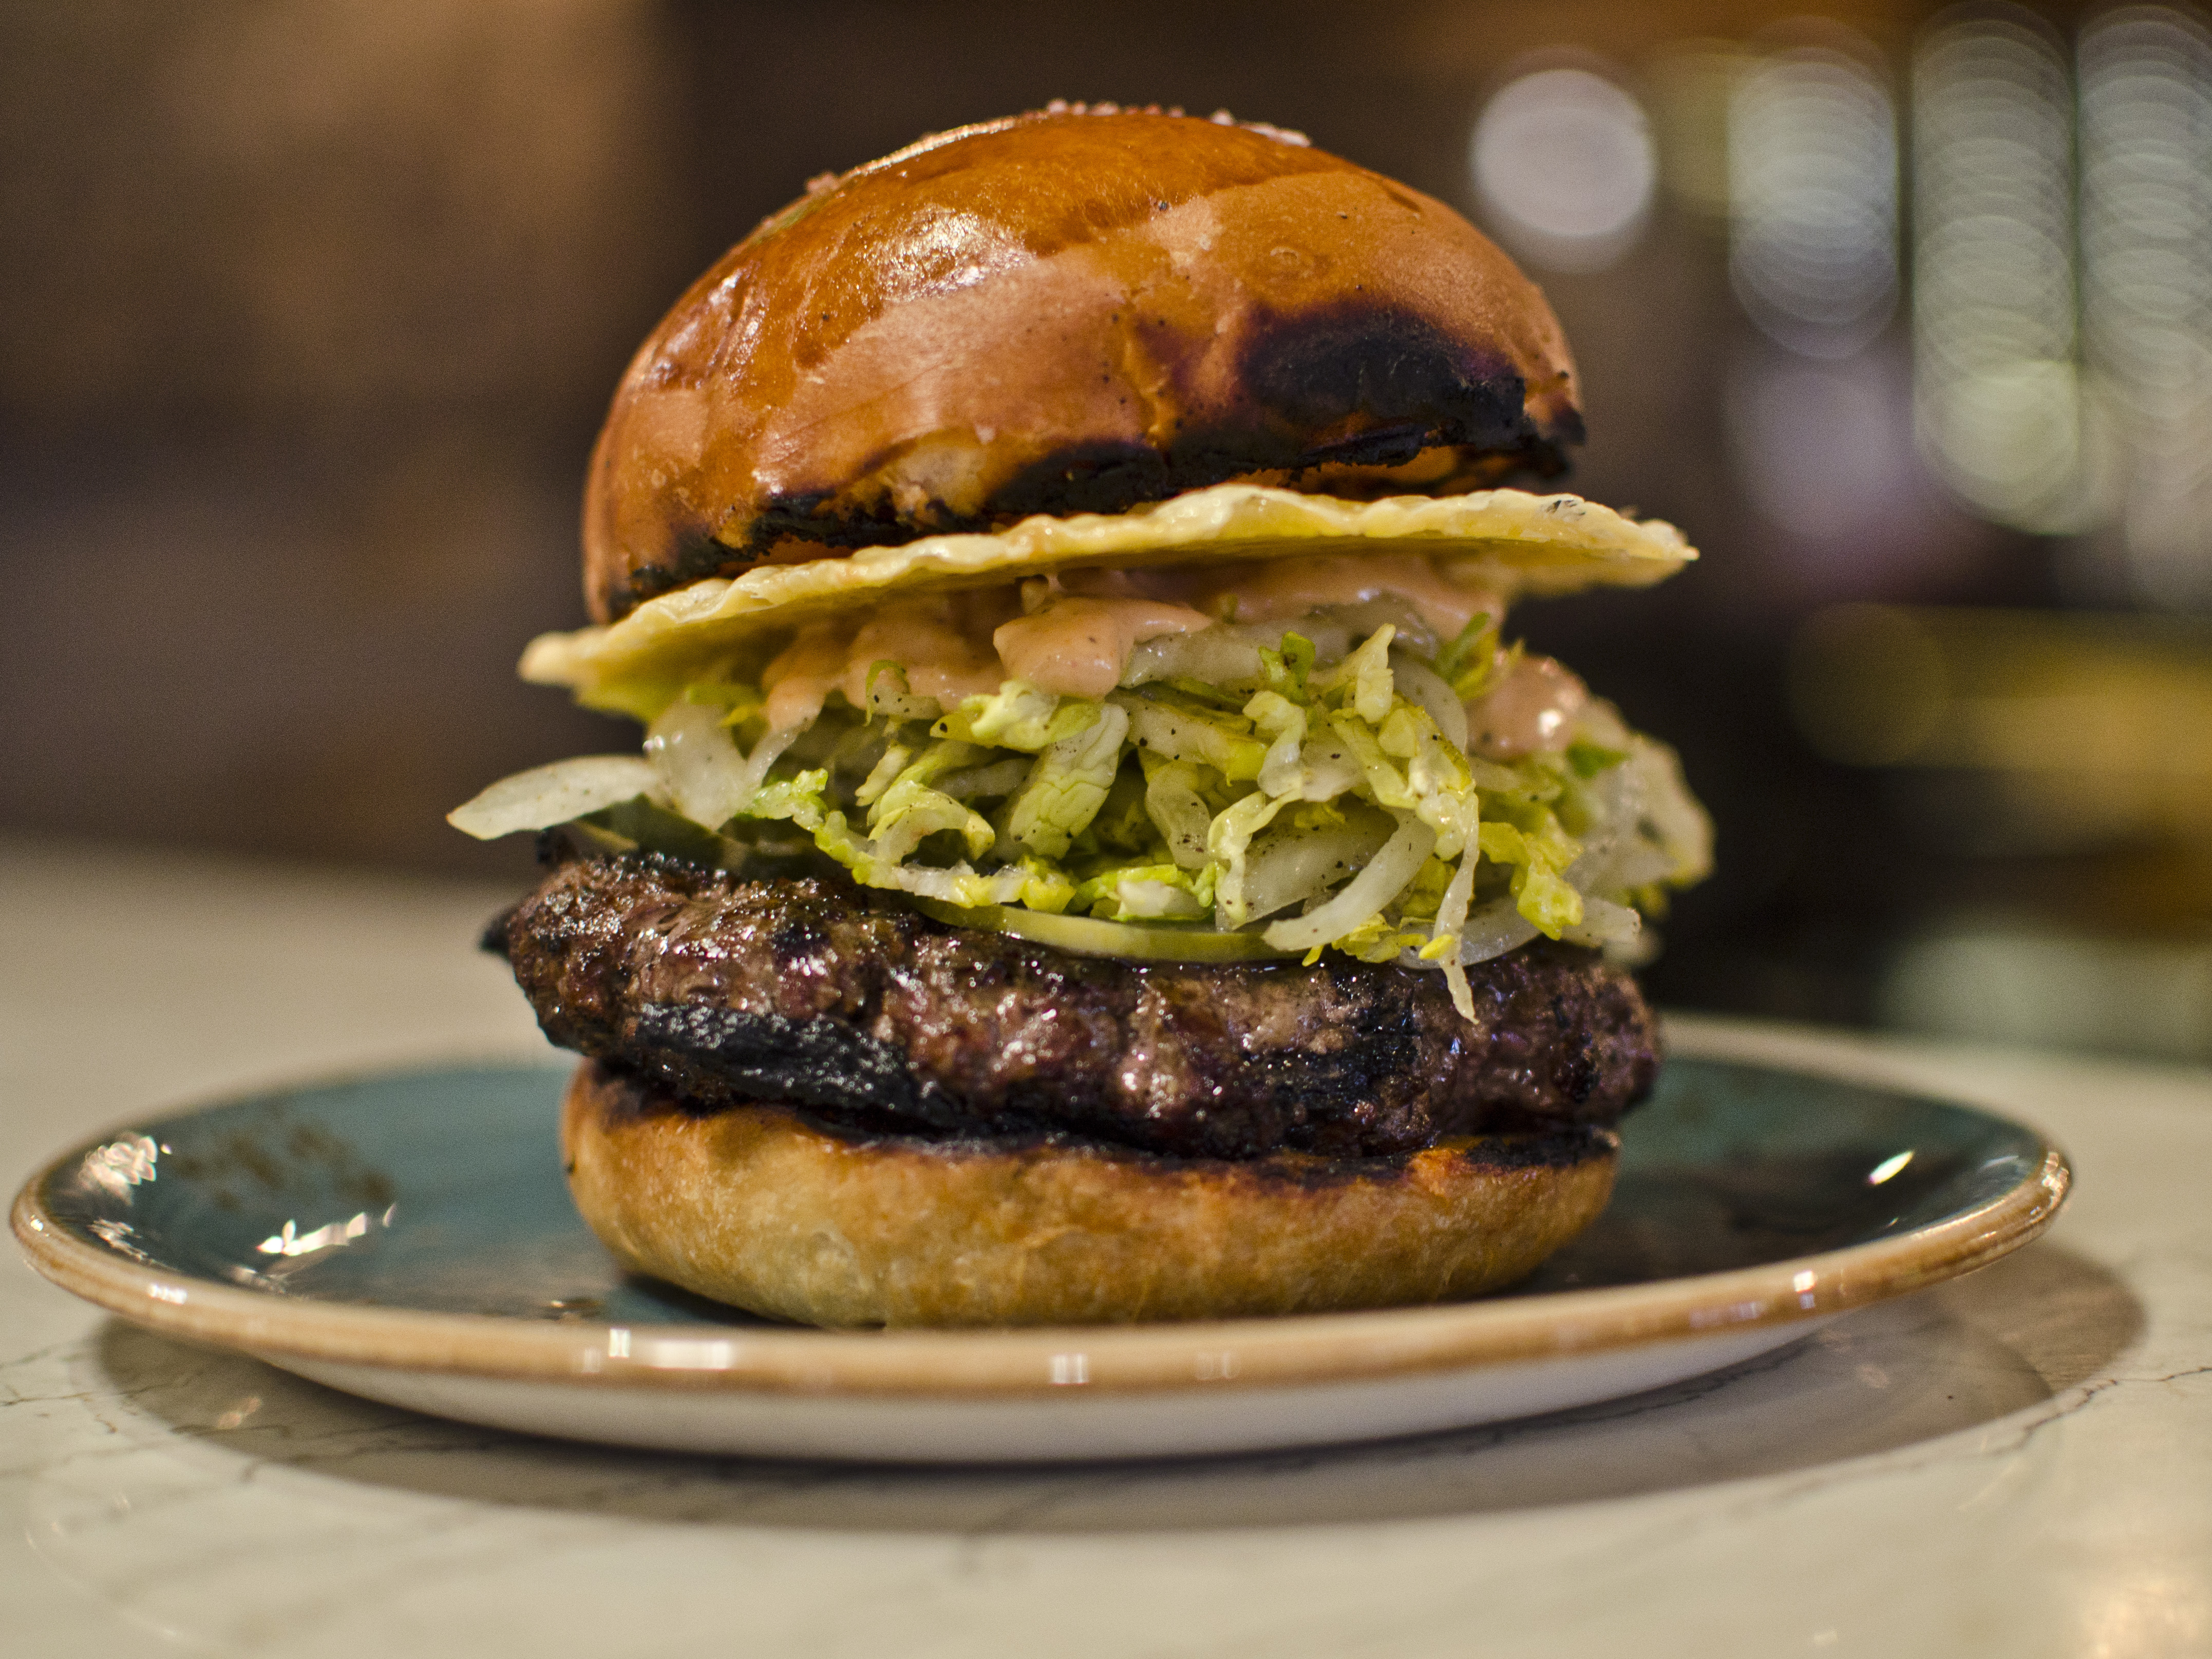 A burger sits on a blue plate, piled high with shredded lettuce, sauce, and a crispy disc of cheese